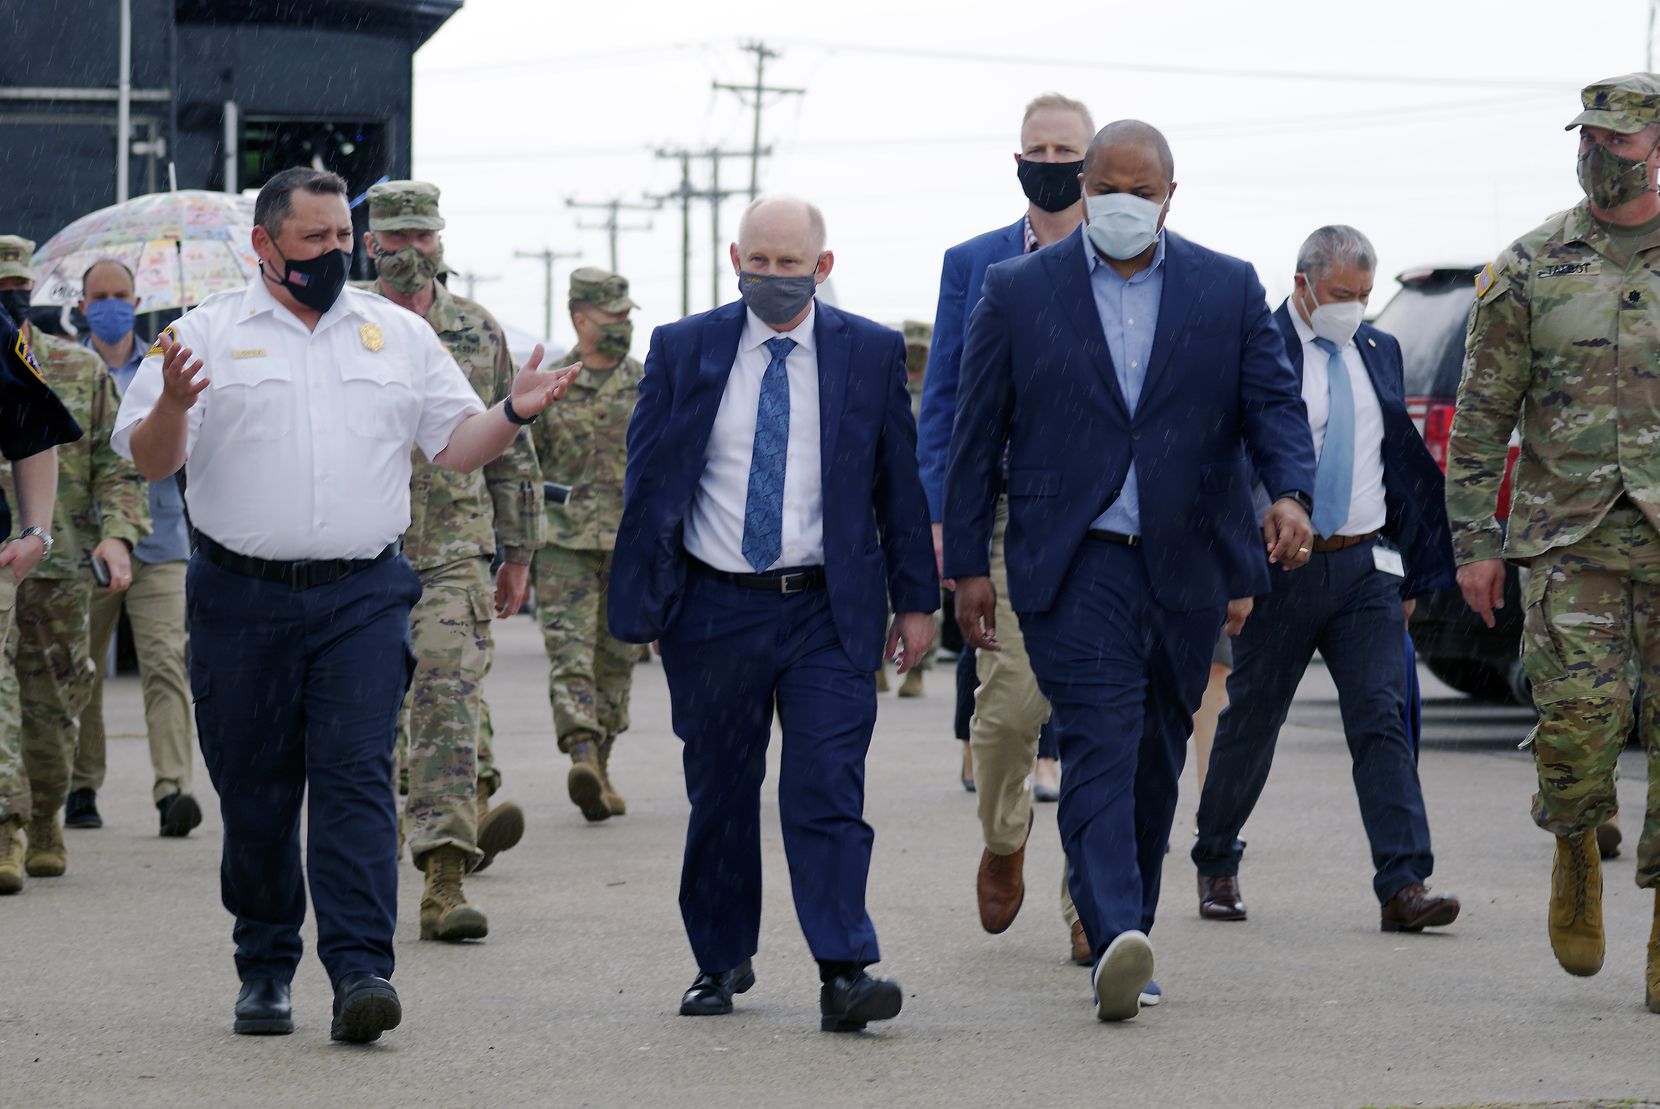 Dallas Mayor Eric Johnson (right) toured Dallas County's Community Vaccination Center at Fair Park in March with John Whitley (center), acting secretary of the Army, and Incident Commander Steve Lopez (left) of the Dallas Fire Department.